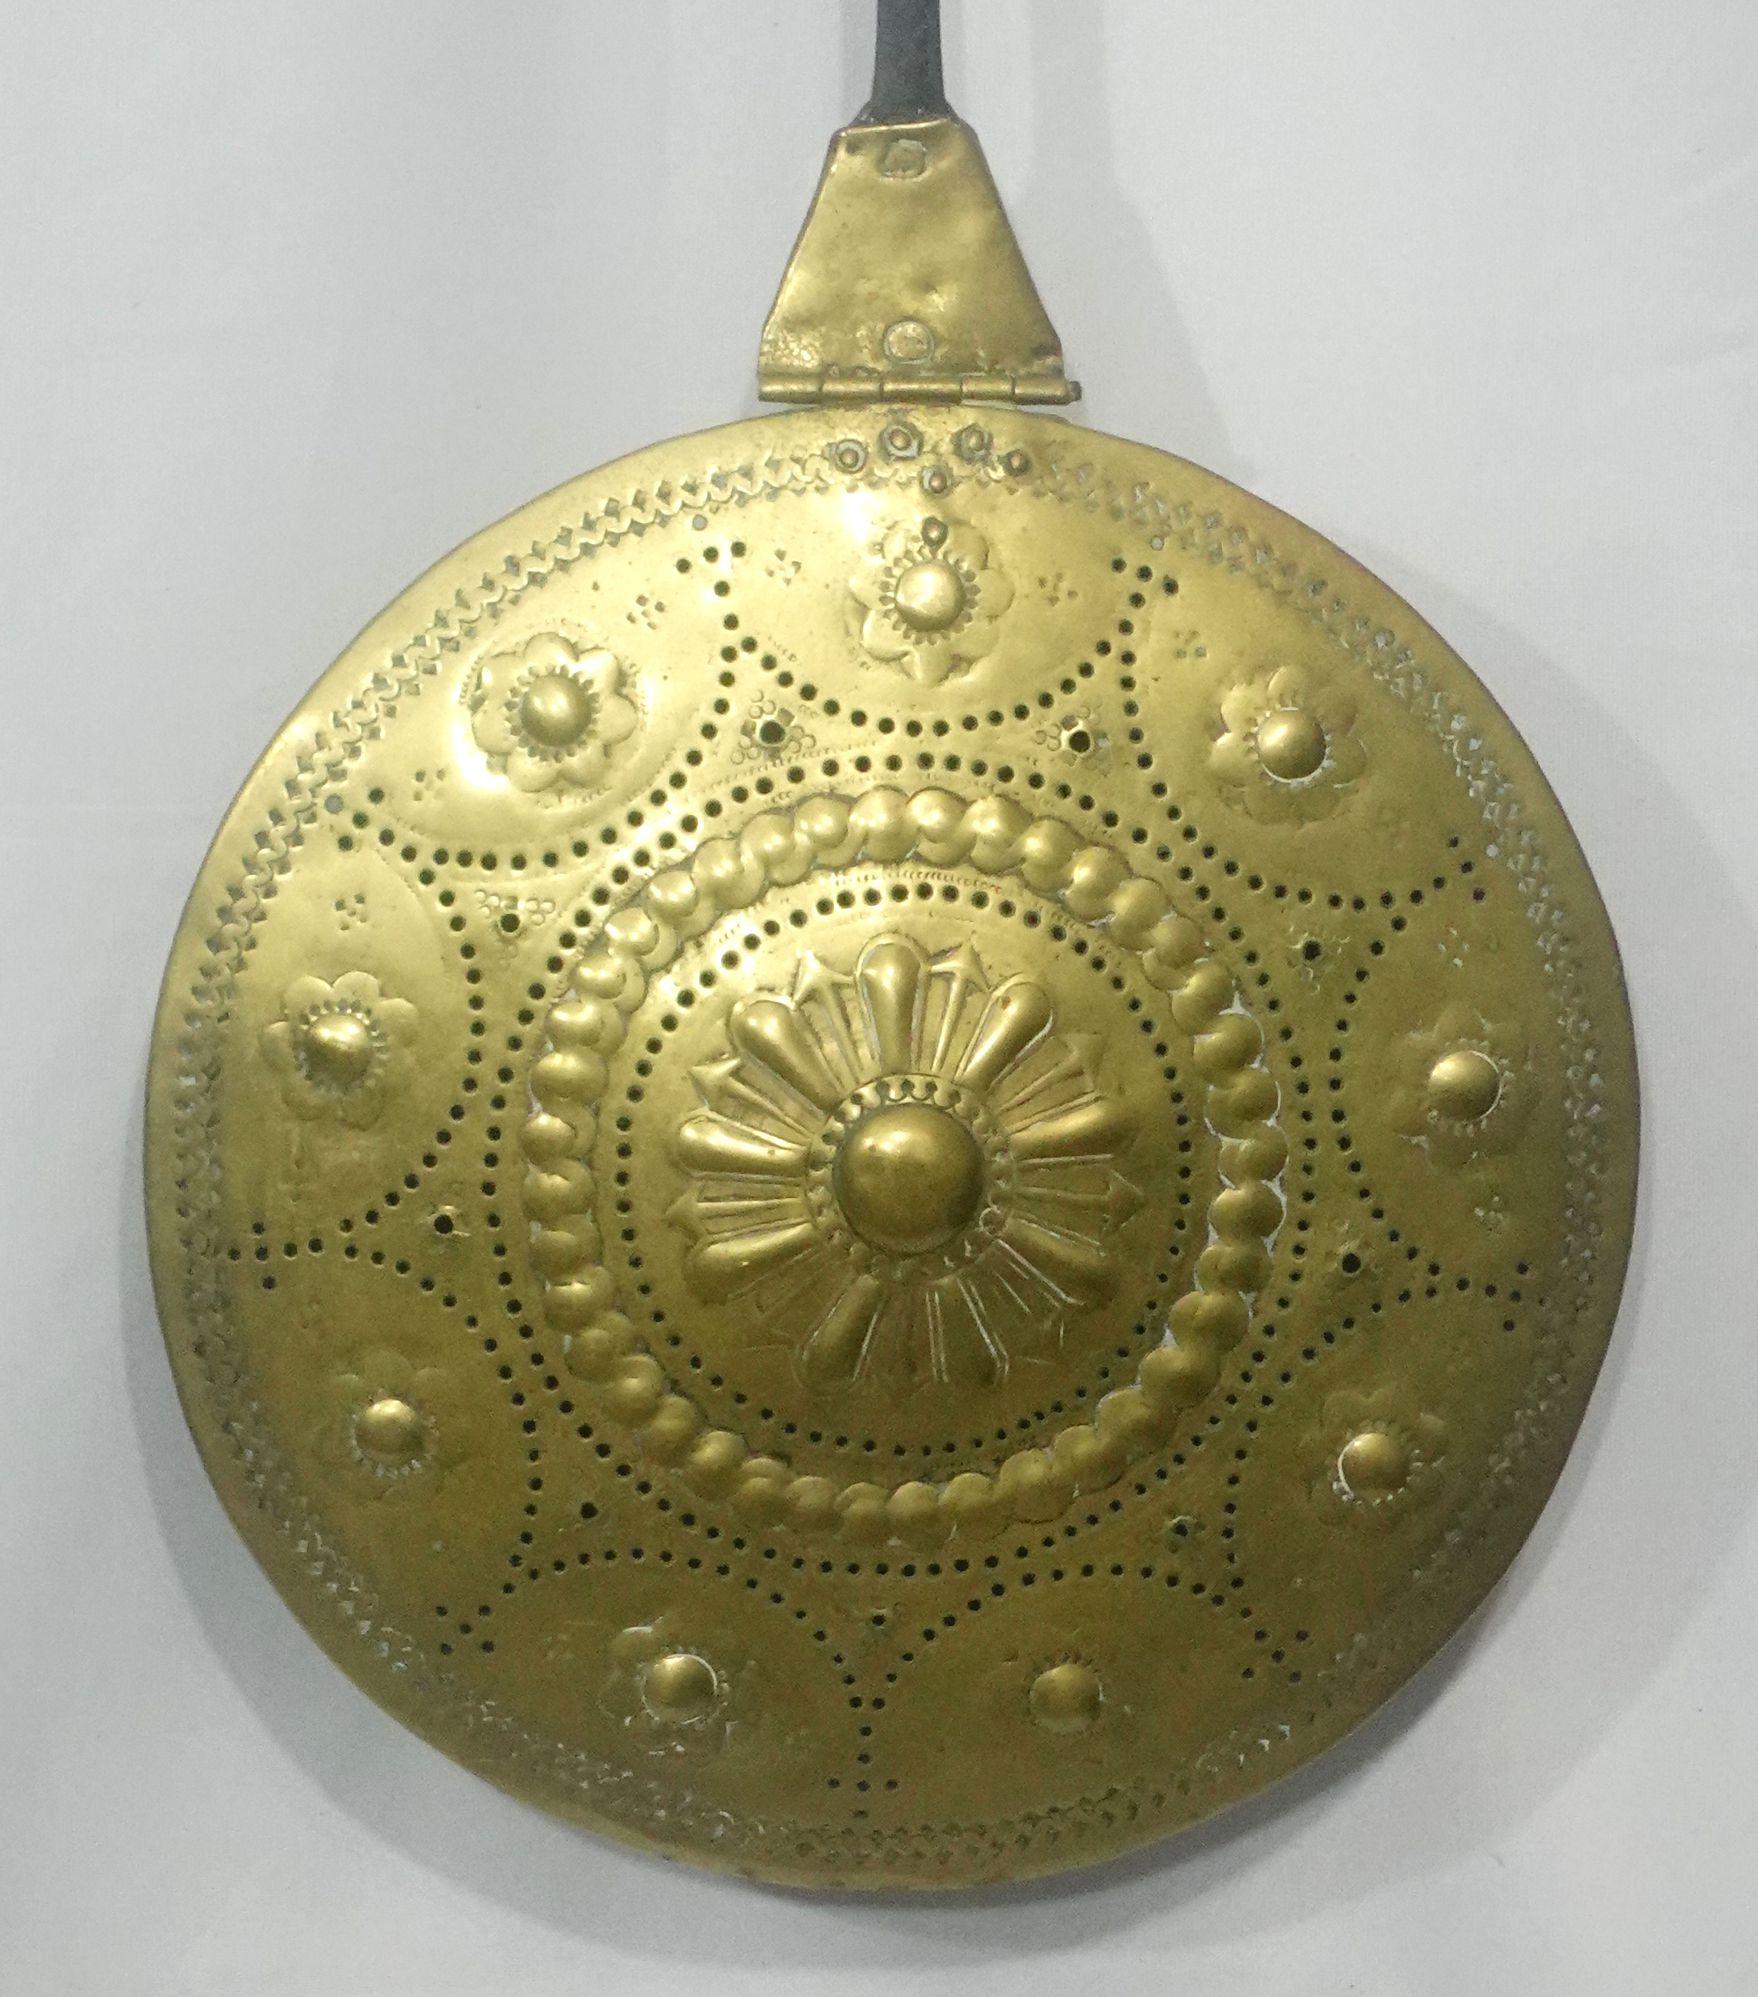 French, brass bedwarmer with iron handle, delicate pattern design in punched and hand-hammered design from the 18th century. European warmers have metal handles.

They were heated by stones put inside to provide a transfer of heat. They stay hot and